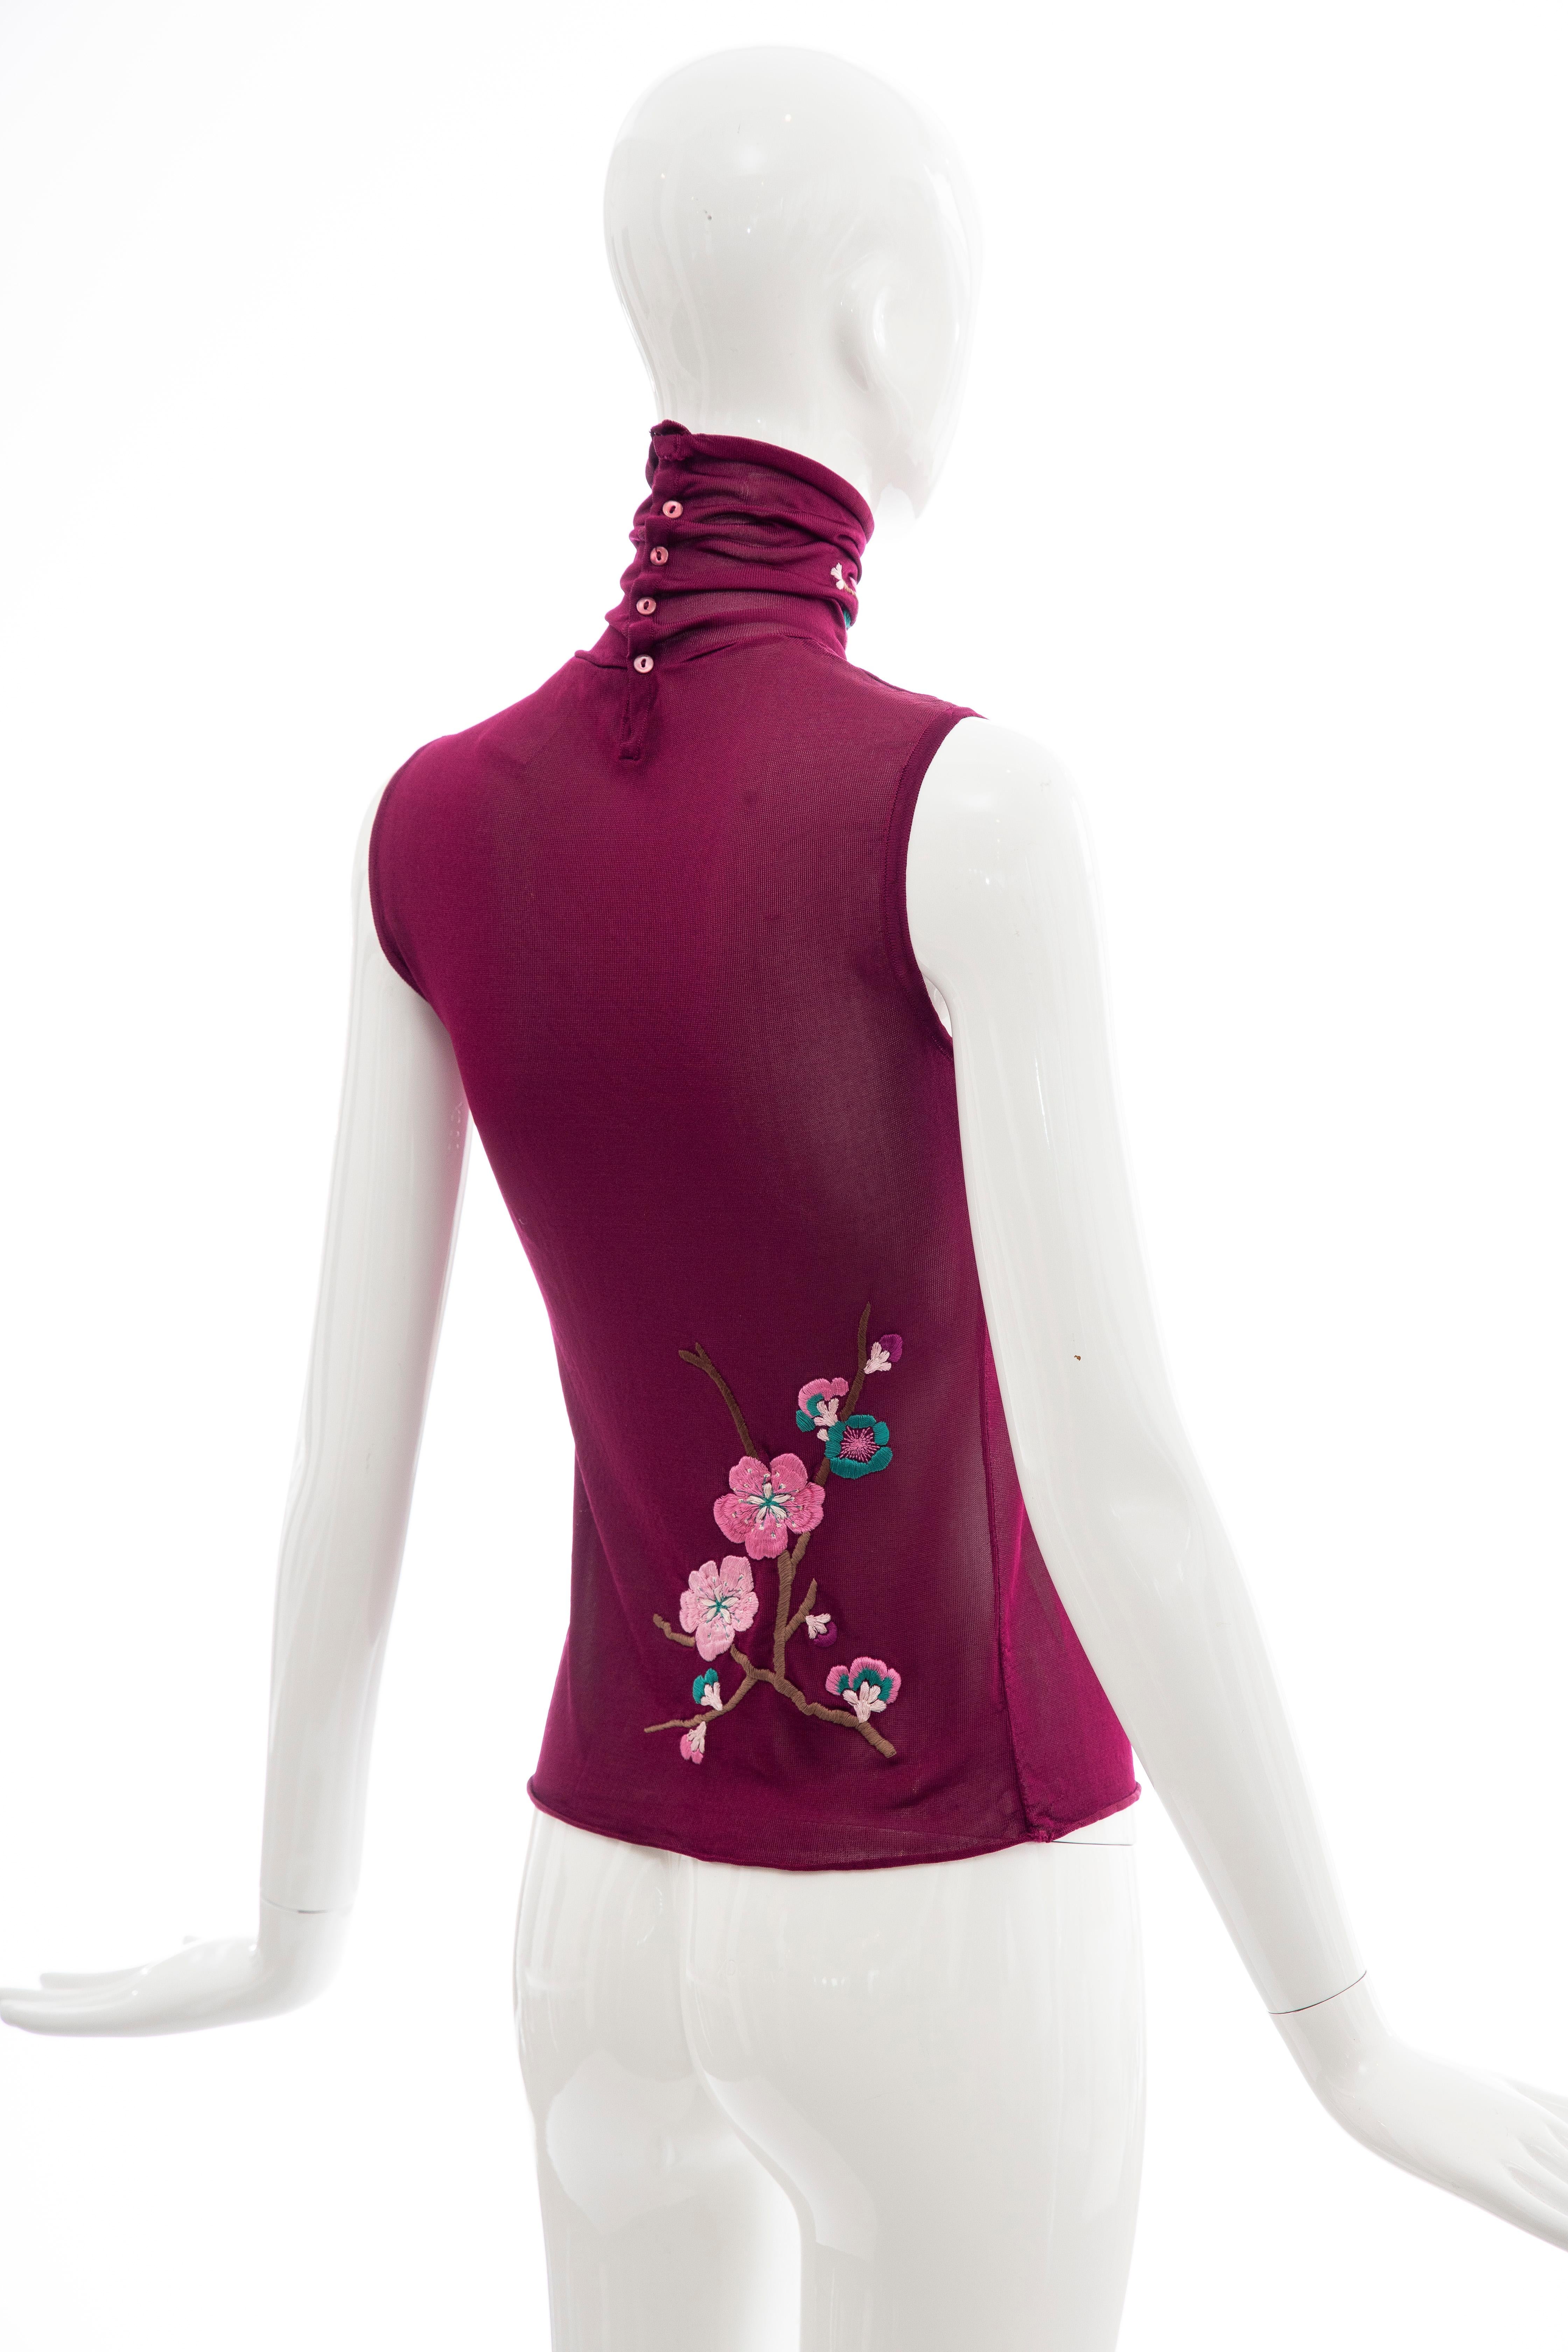 Women's or Men's John Galliano for Christian Dior Embroidered Sleeveless Top, Fall 2003